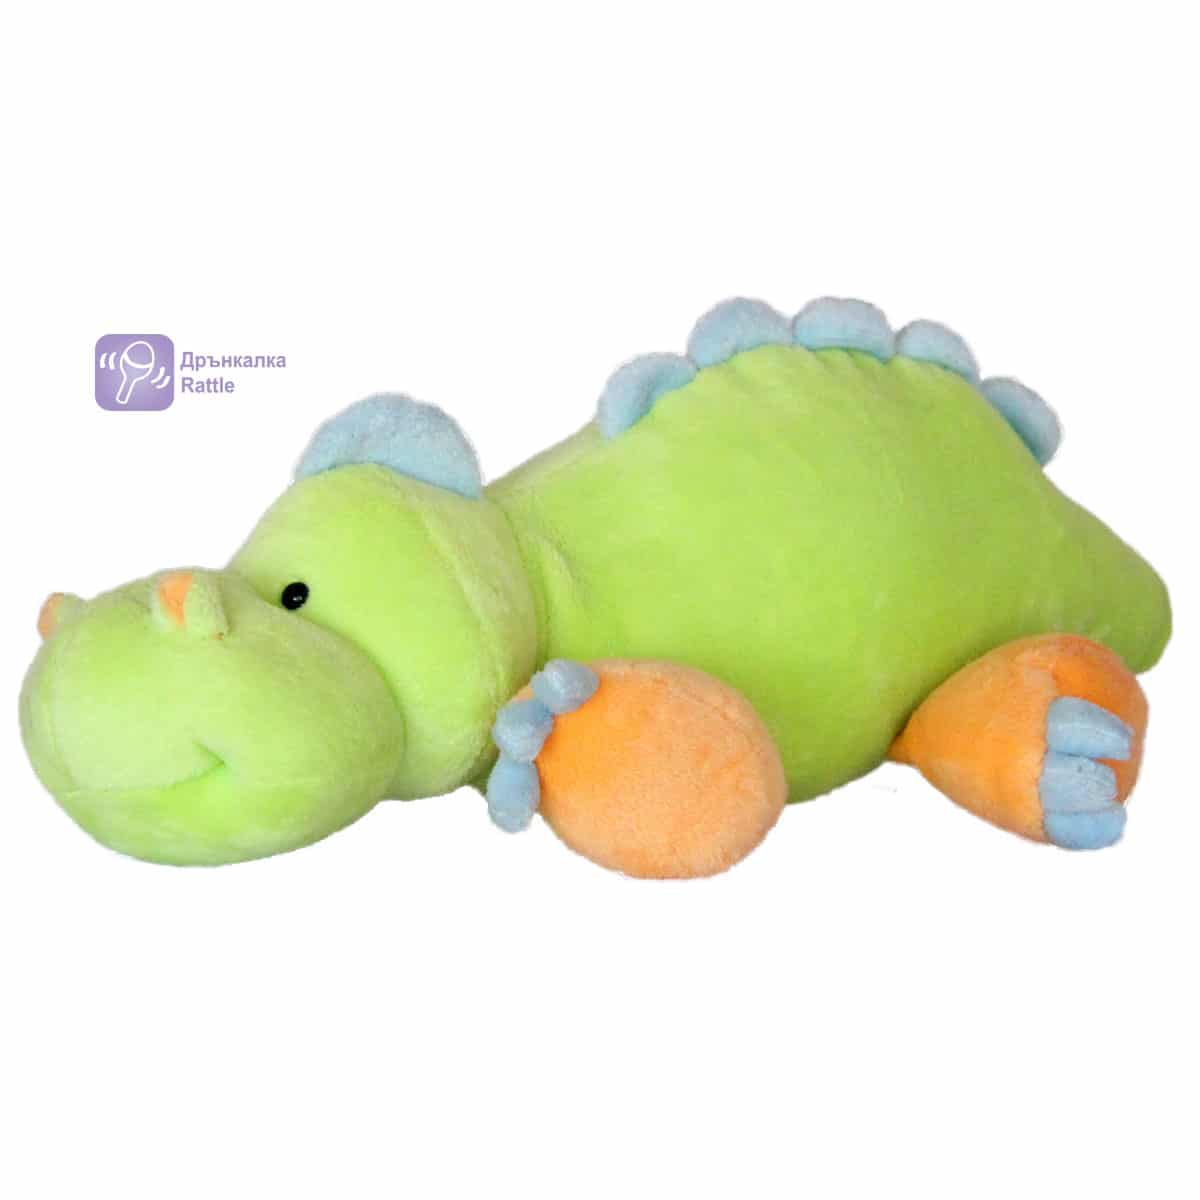 Dinosaur with rattle - Green